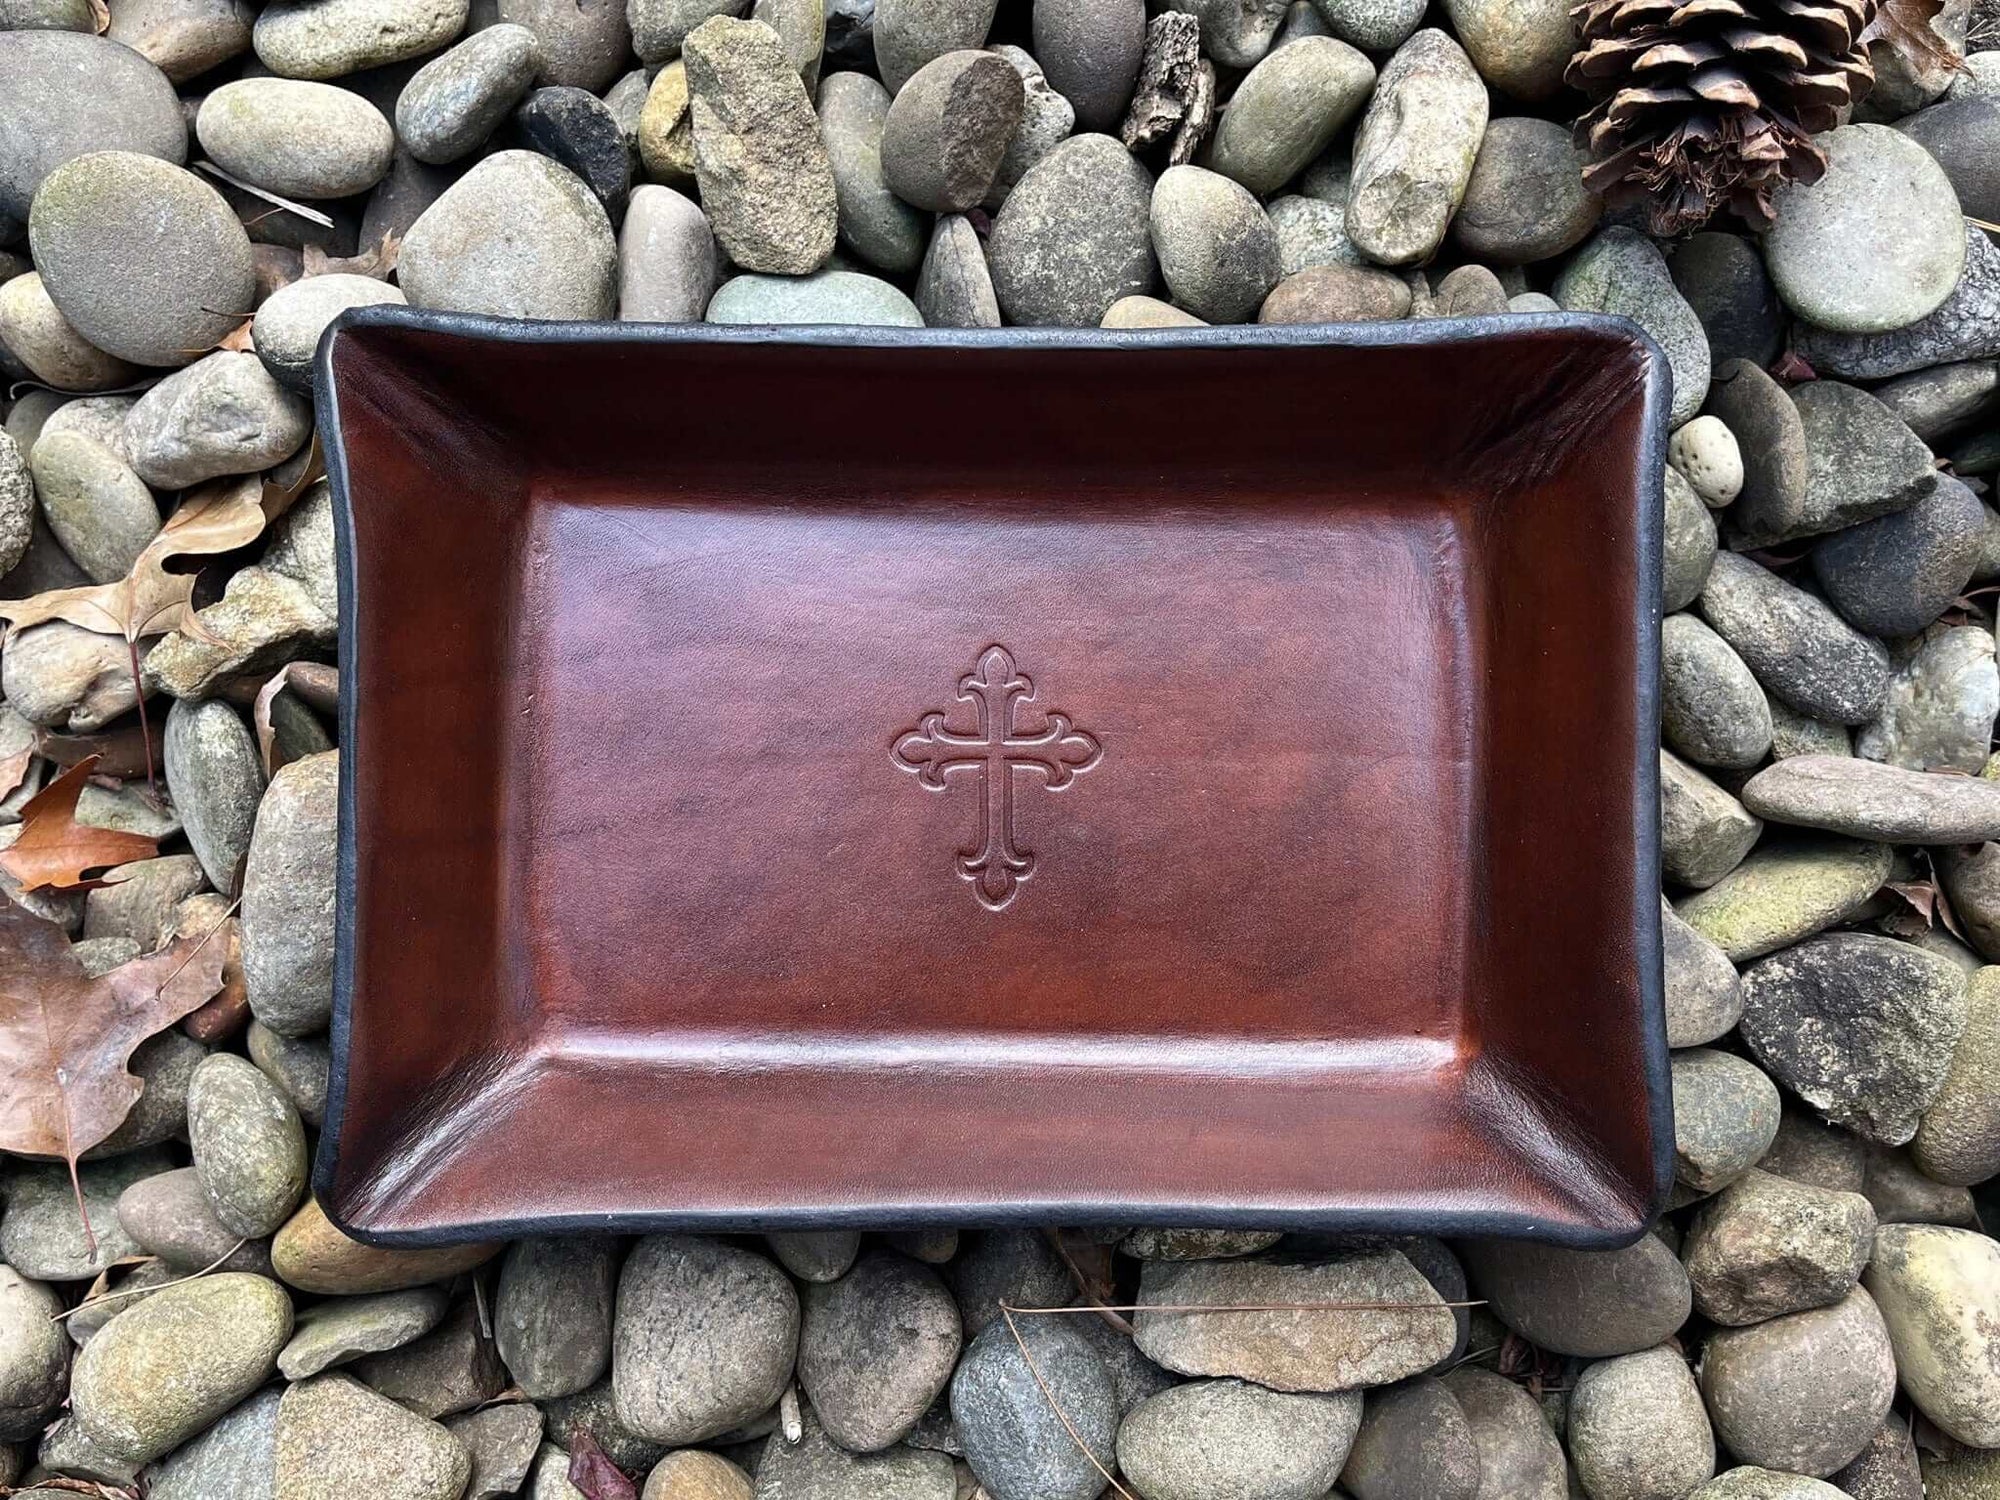 Rectangular leather valet tray with embossed cross. Brown